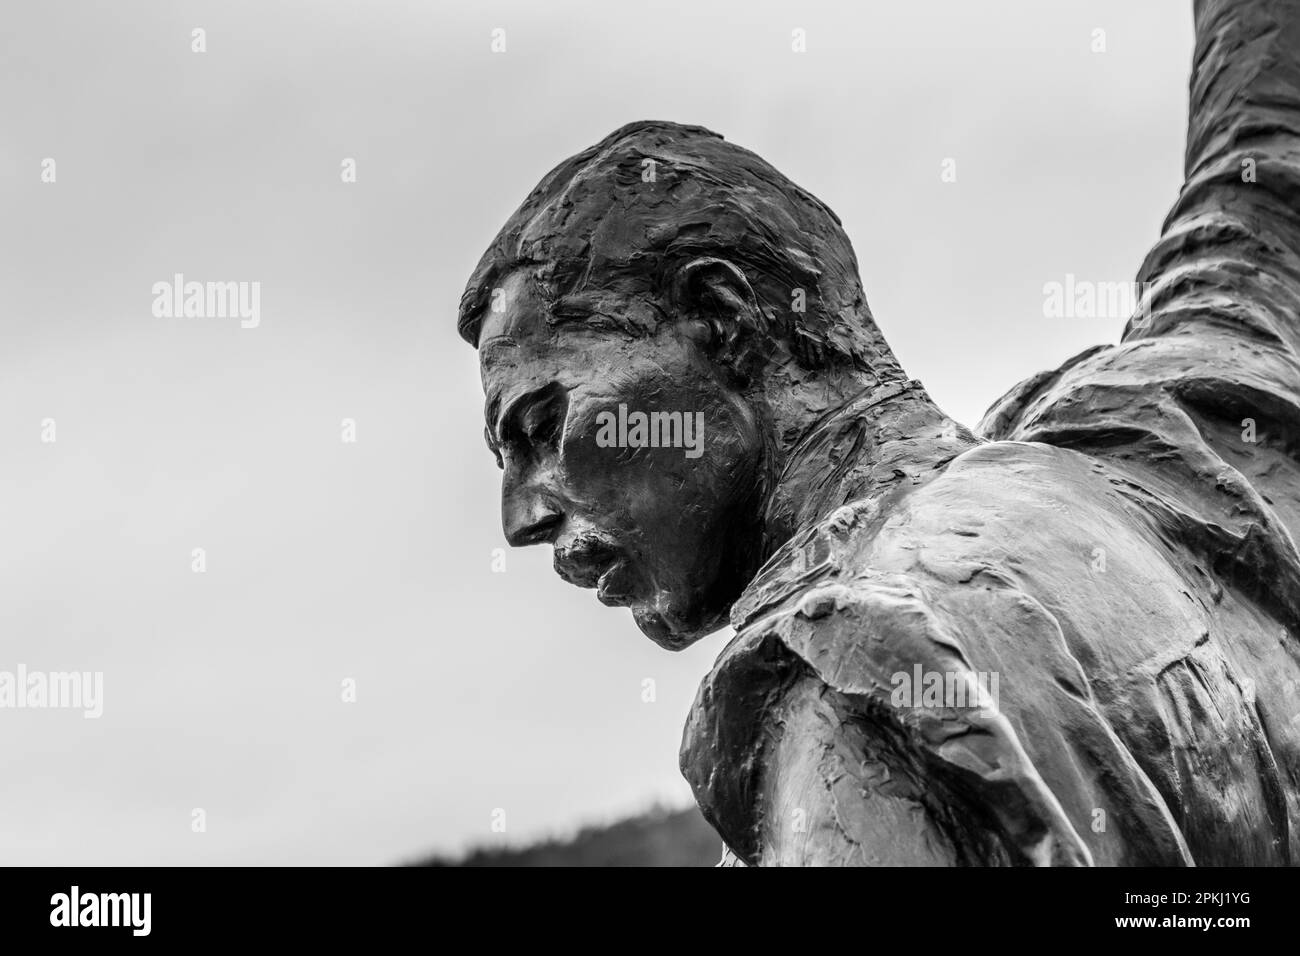 Statue of Freddie Mercury in Montreux Stock Photo